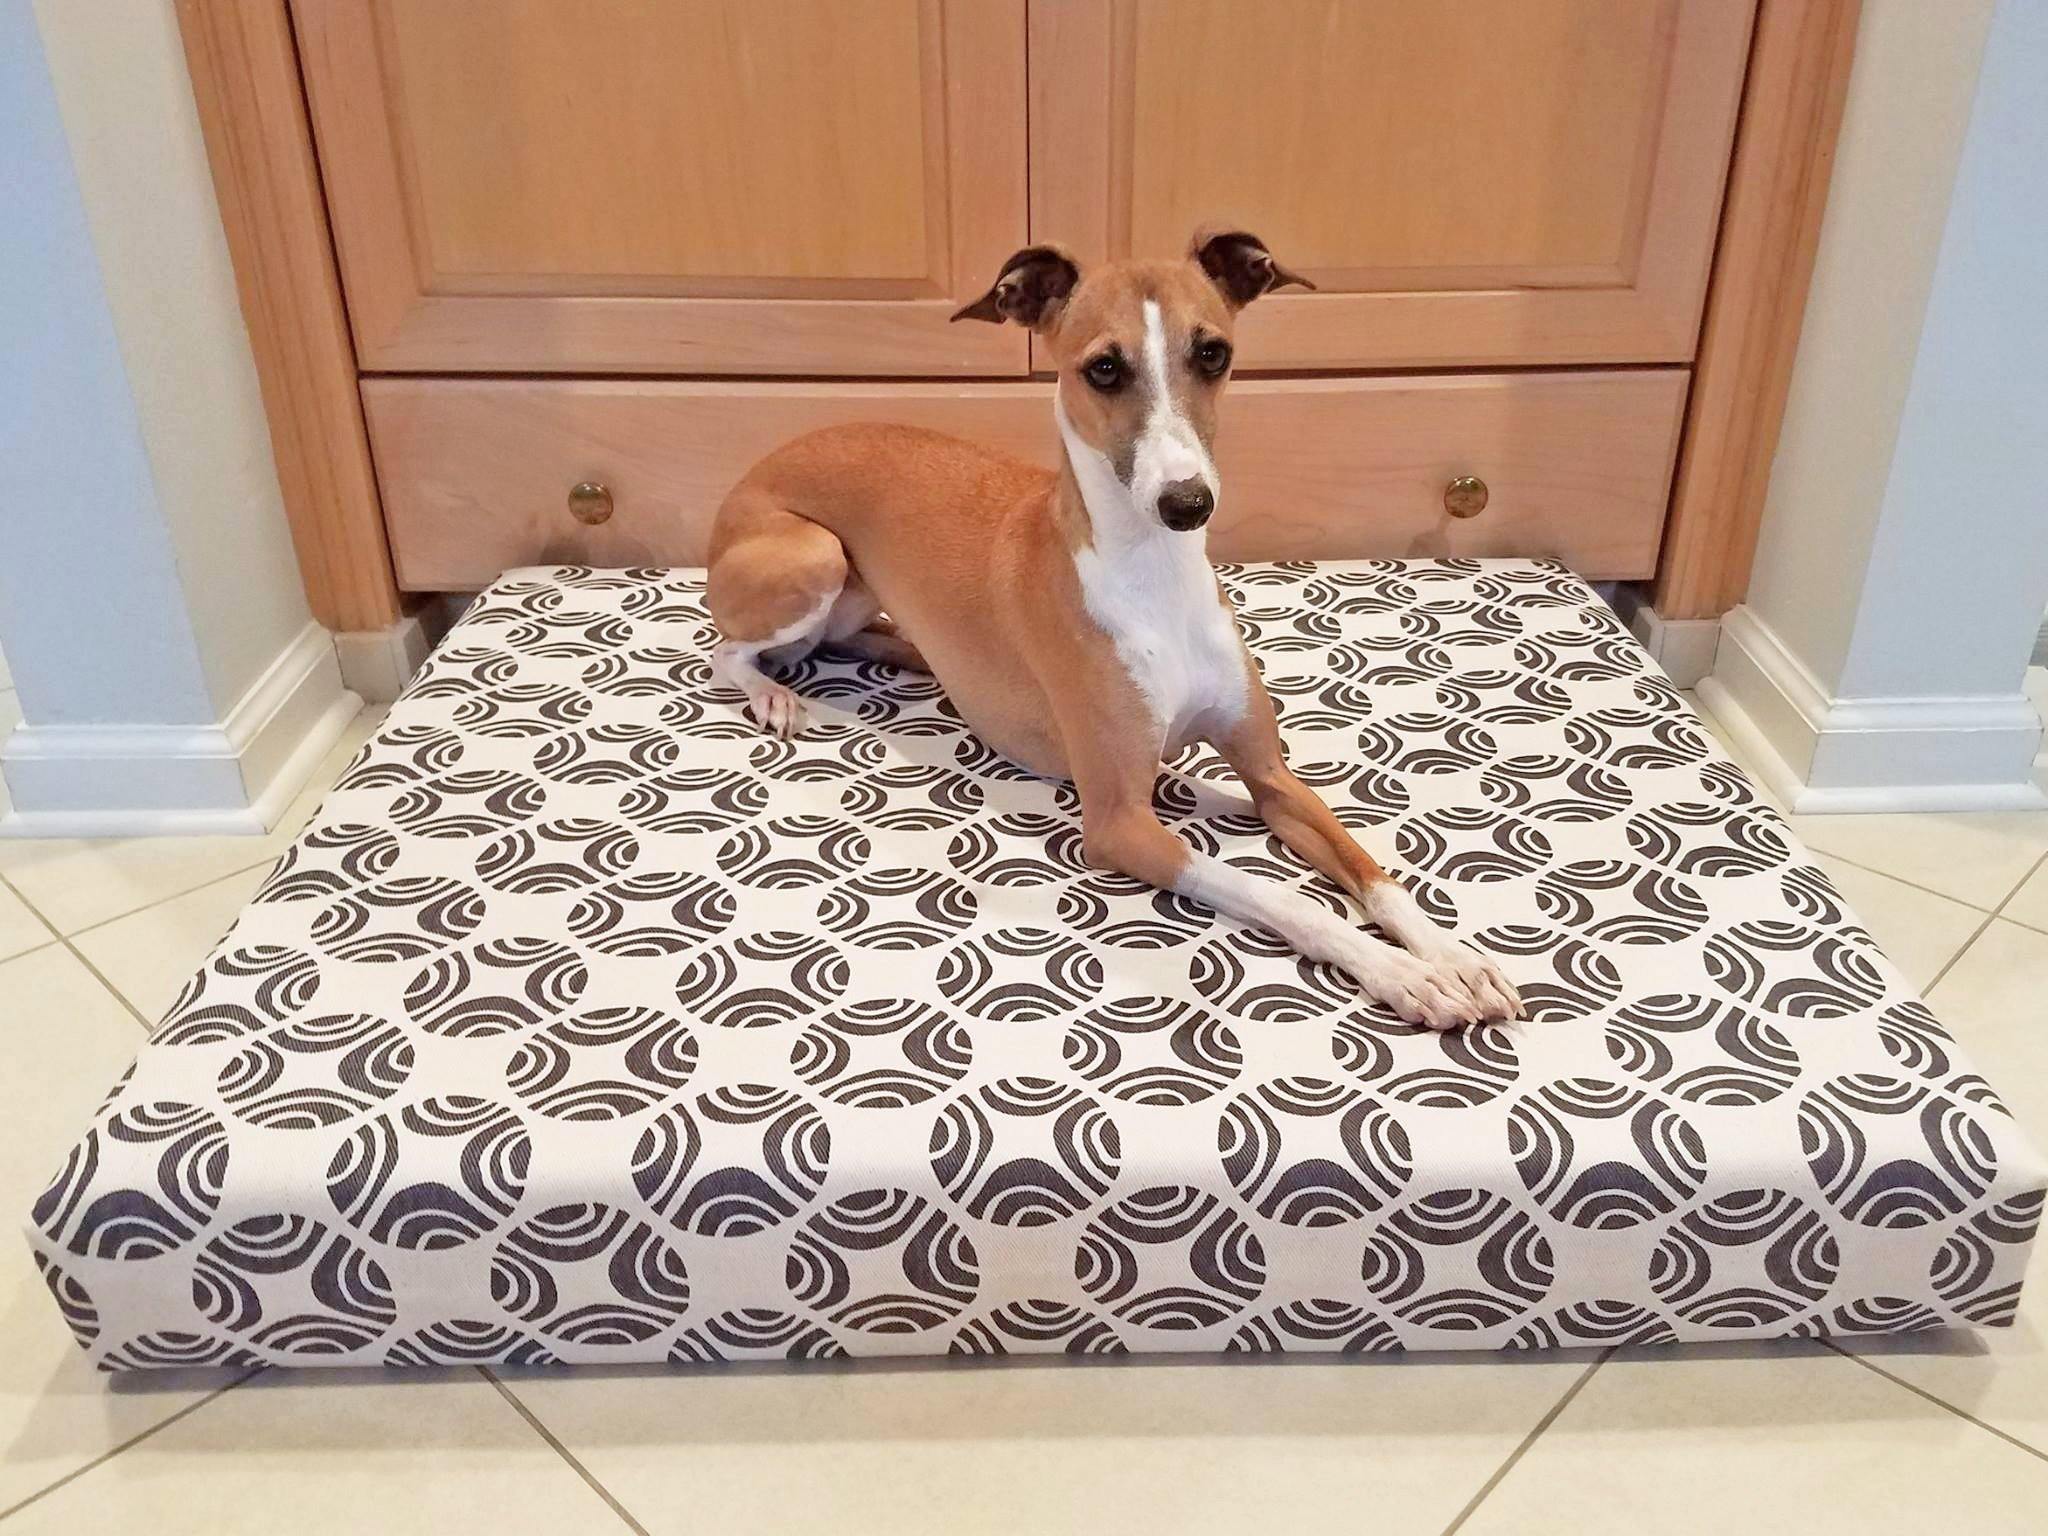 greyhound dog laying on organic orthopedic dog bed in white and brown picasso print